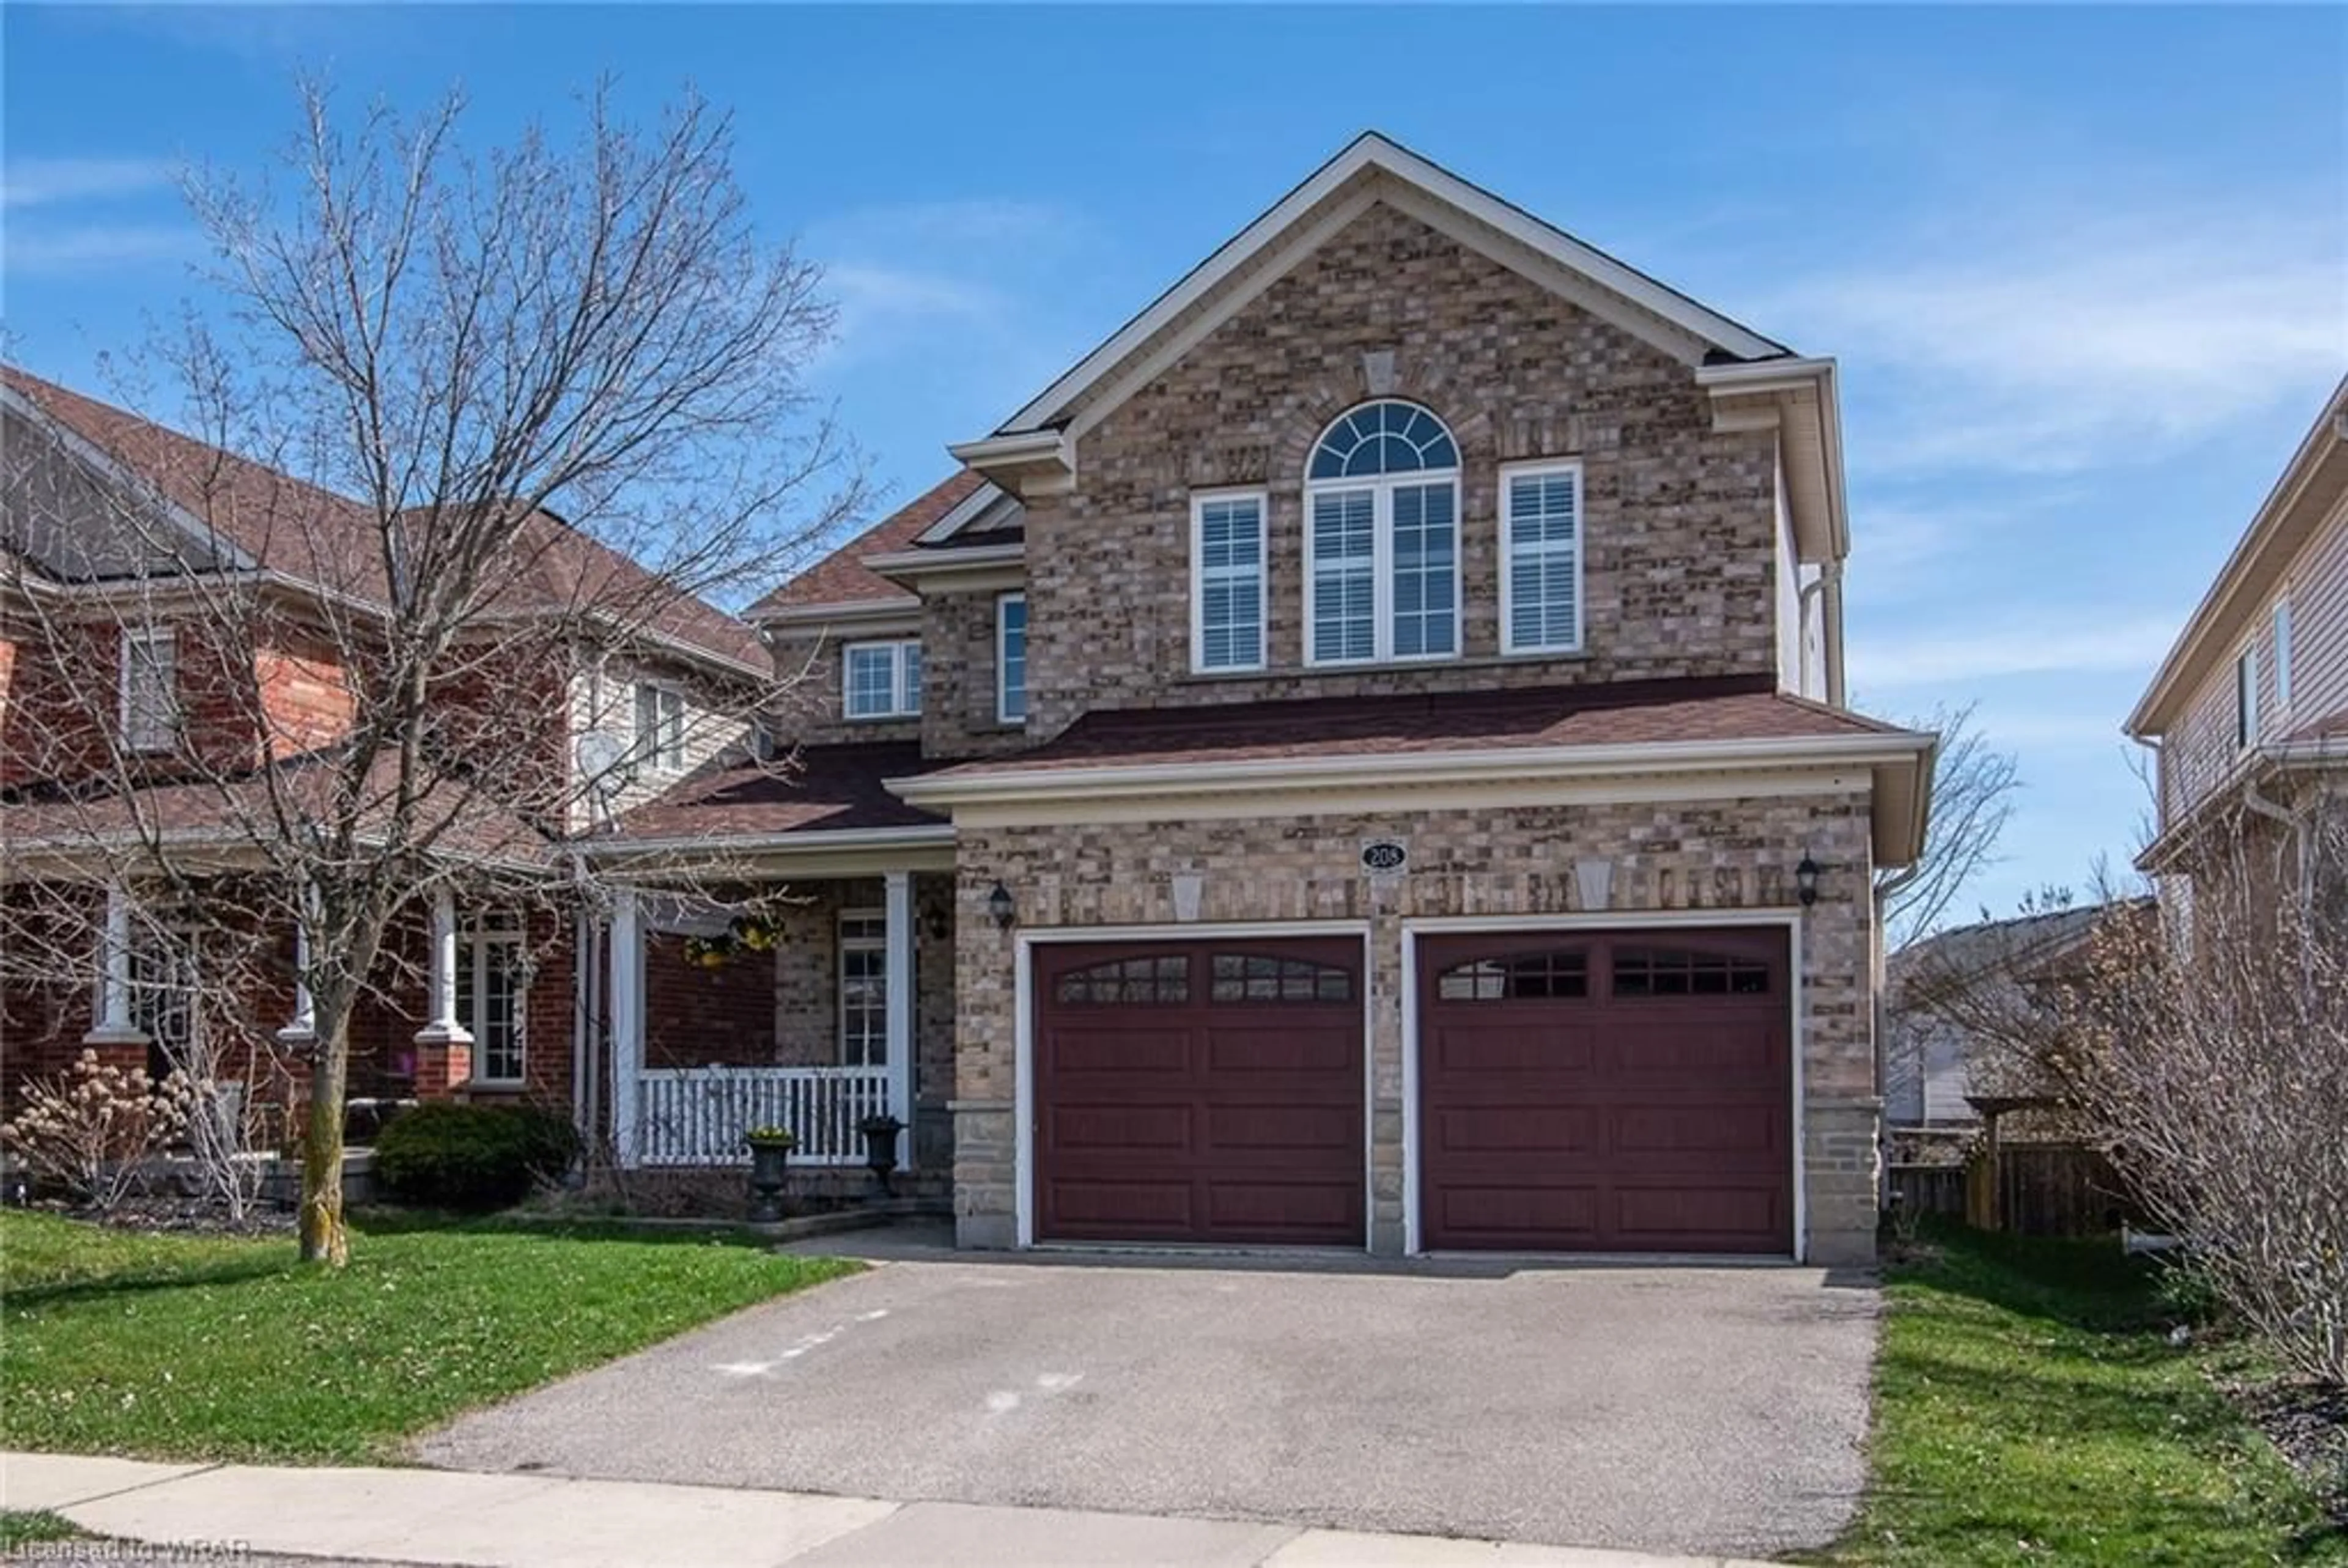 Home with brick exterior material for 208 Ridgemere Crt, Kitchener Ontario N2P 2V5